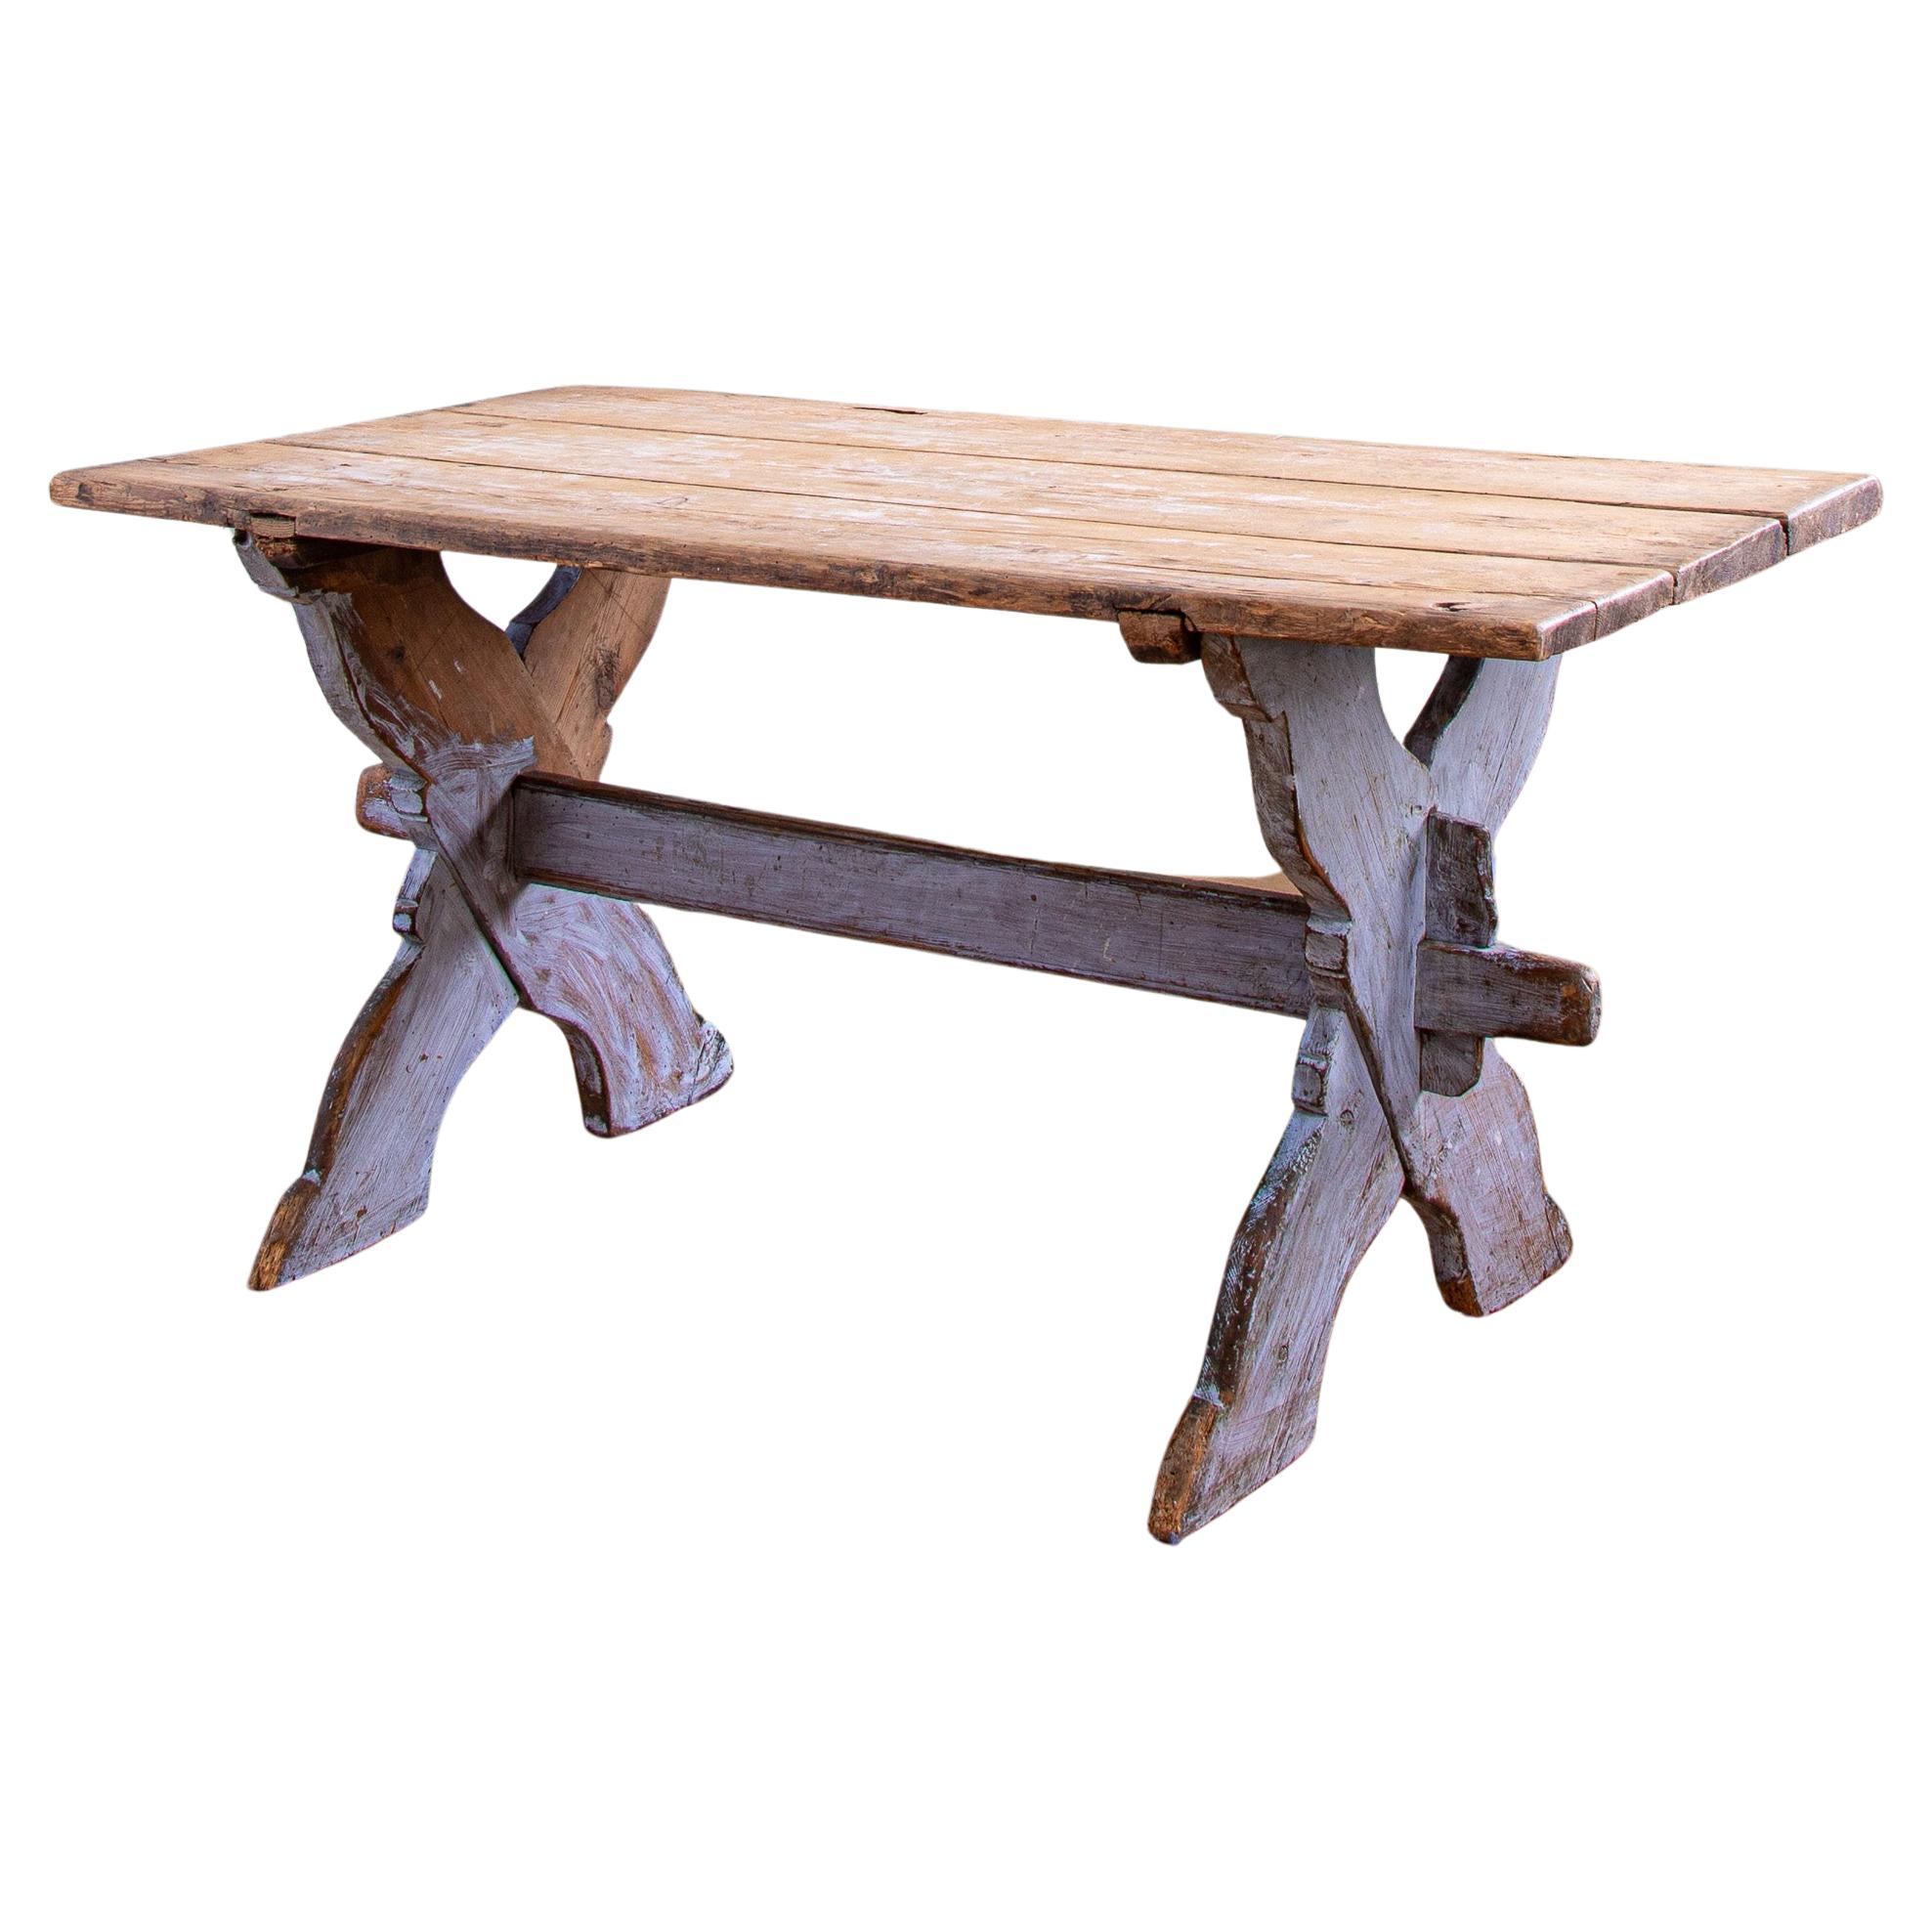 Antique Rustic Swedish Farm House Table With Chalk Blue Patina Circa 1860